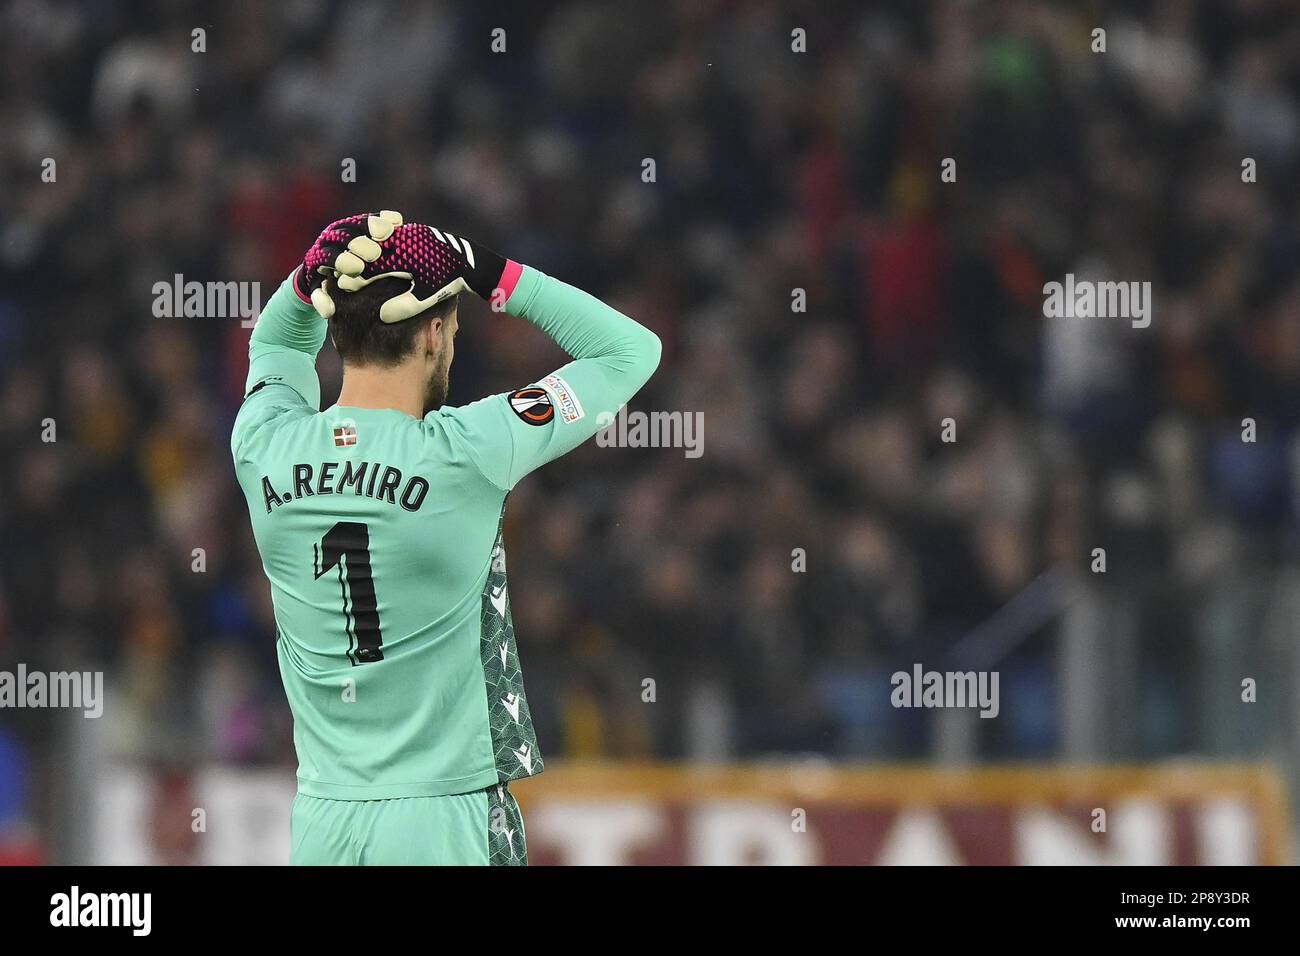 Rome, Italy. 09th Mar, 2023. Alejandro Remiro of Real Sociedad de Futbol during the first leg of the round of 16 of the UEFA Europa League between A.S. Roma and Real Sociedad de Futbol on March 9, 2023 at the Stadio Olimpico in Rome. Credit: Independent Photo Agency/Alamy Live News Stock Photo